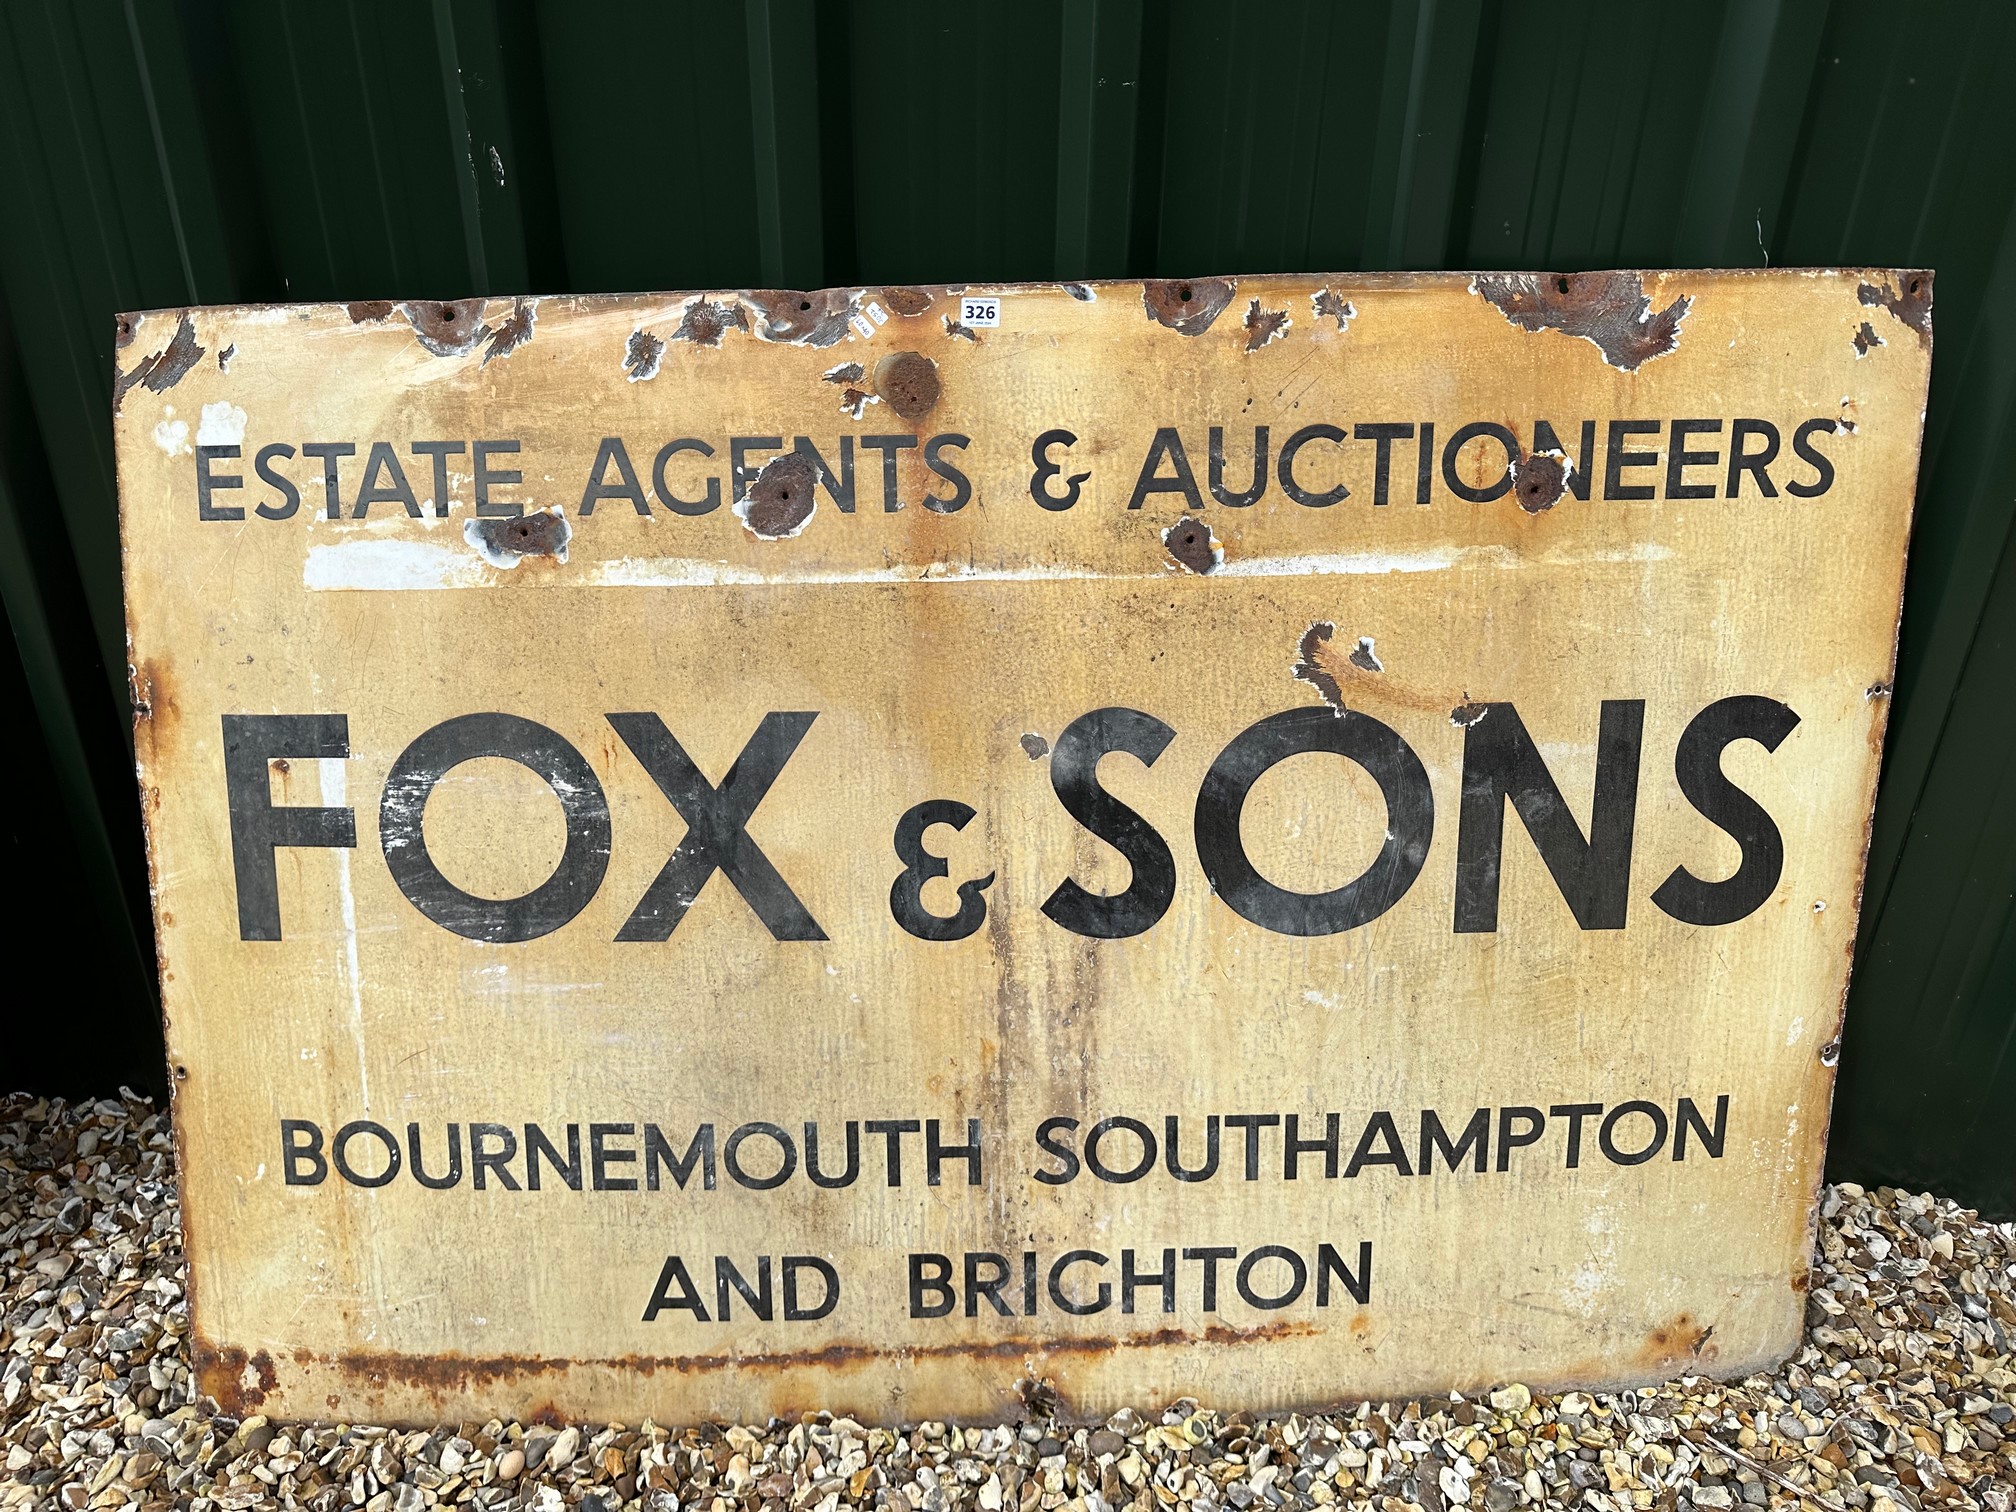 A Fox & Sons Estate Agents & Auctioneers of Bournemouth, Southampton and Brighton enamel advertising